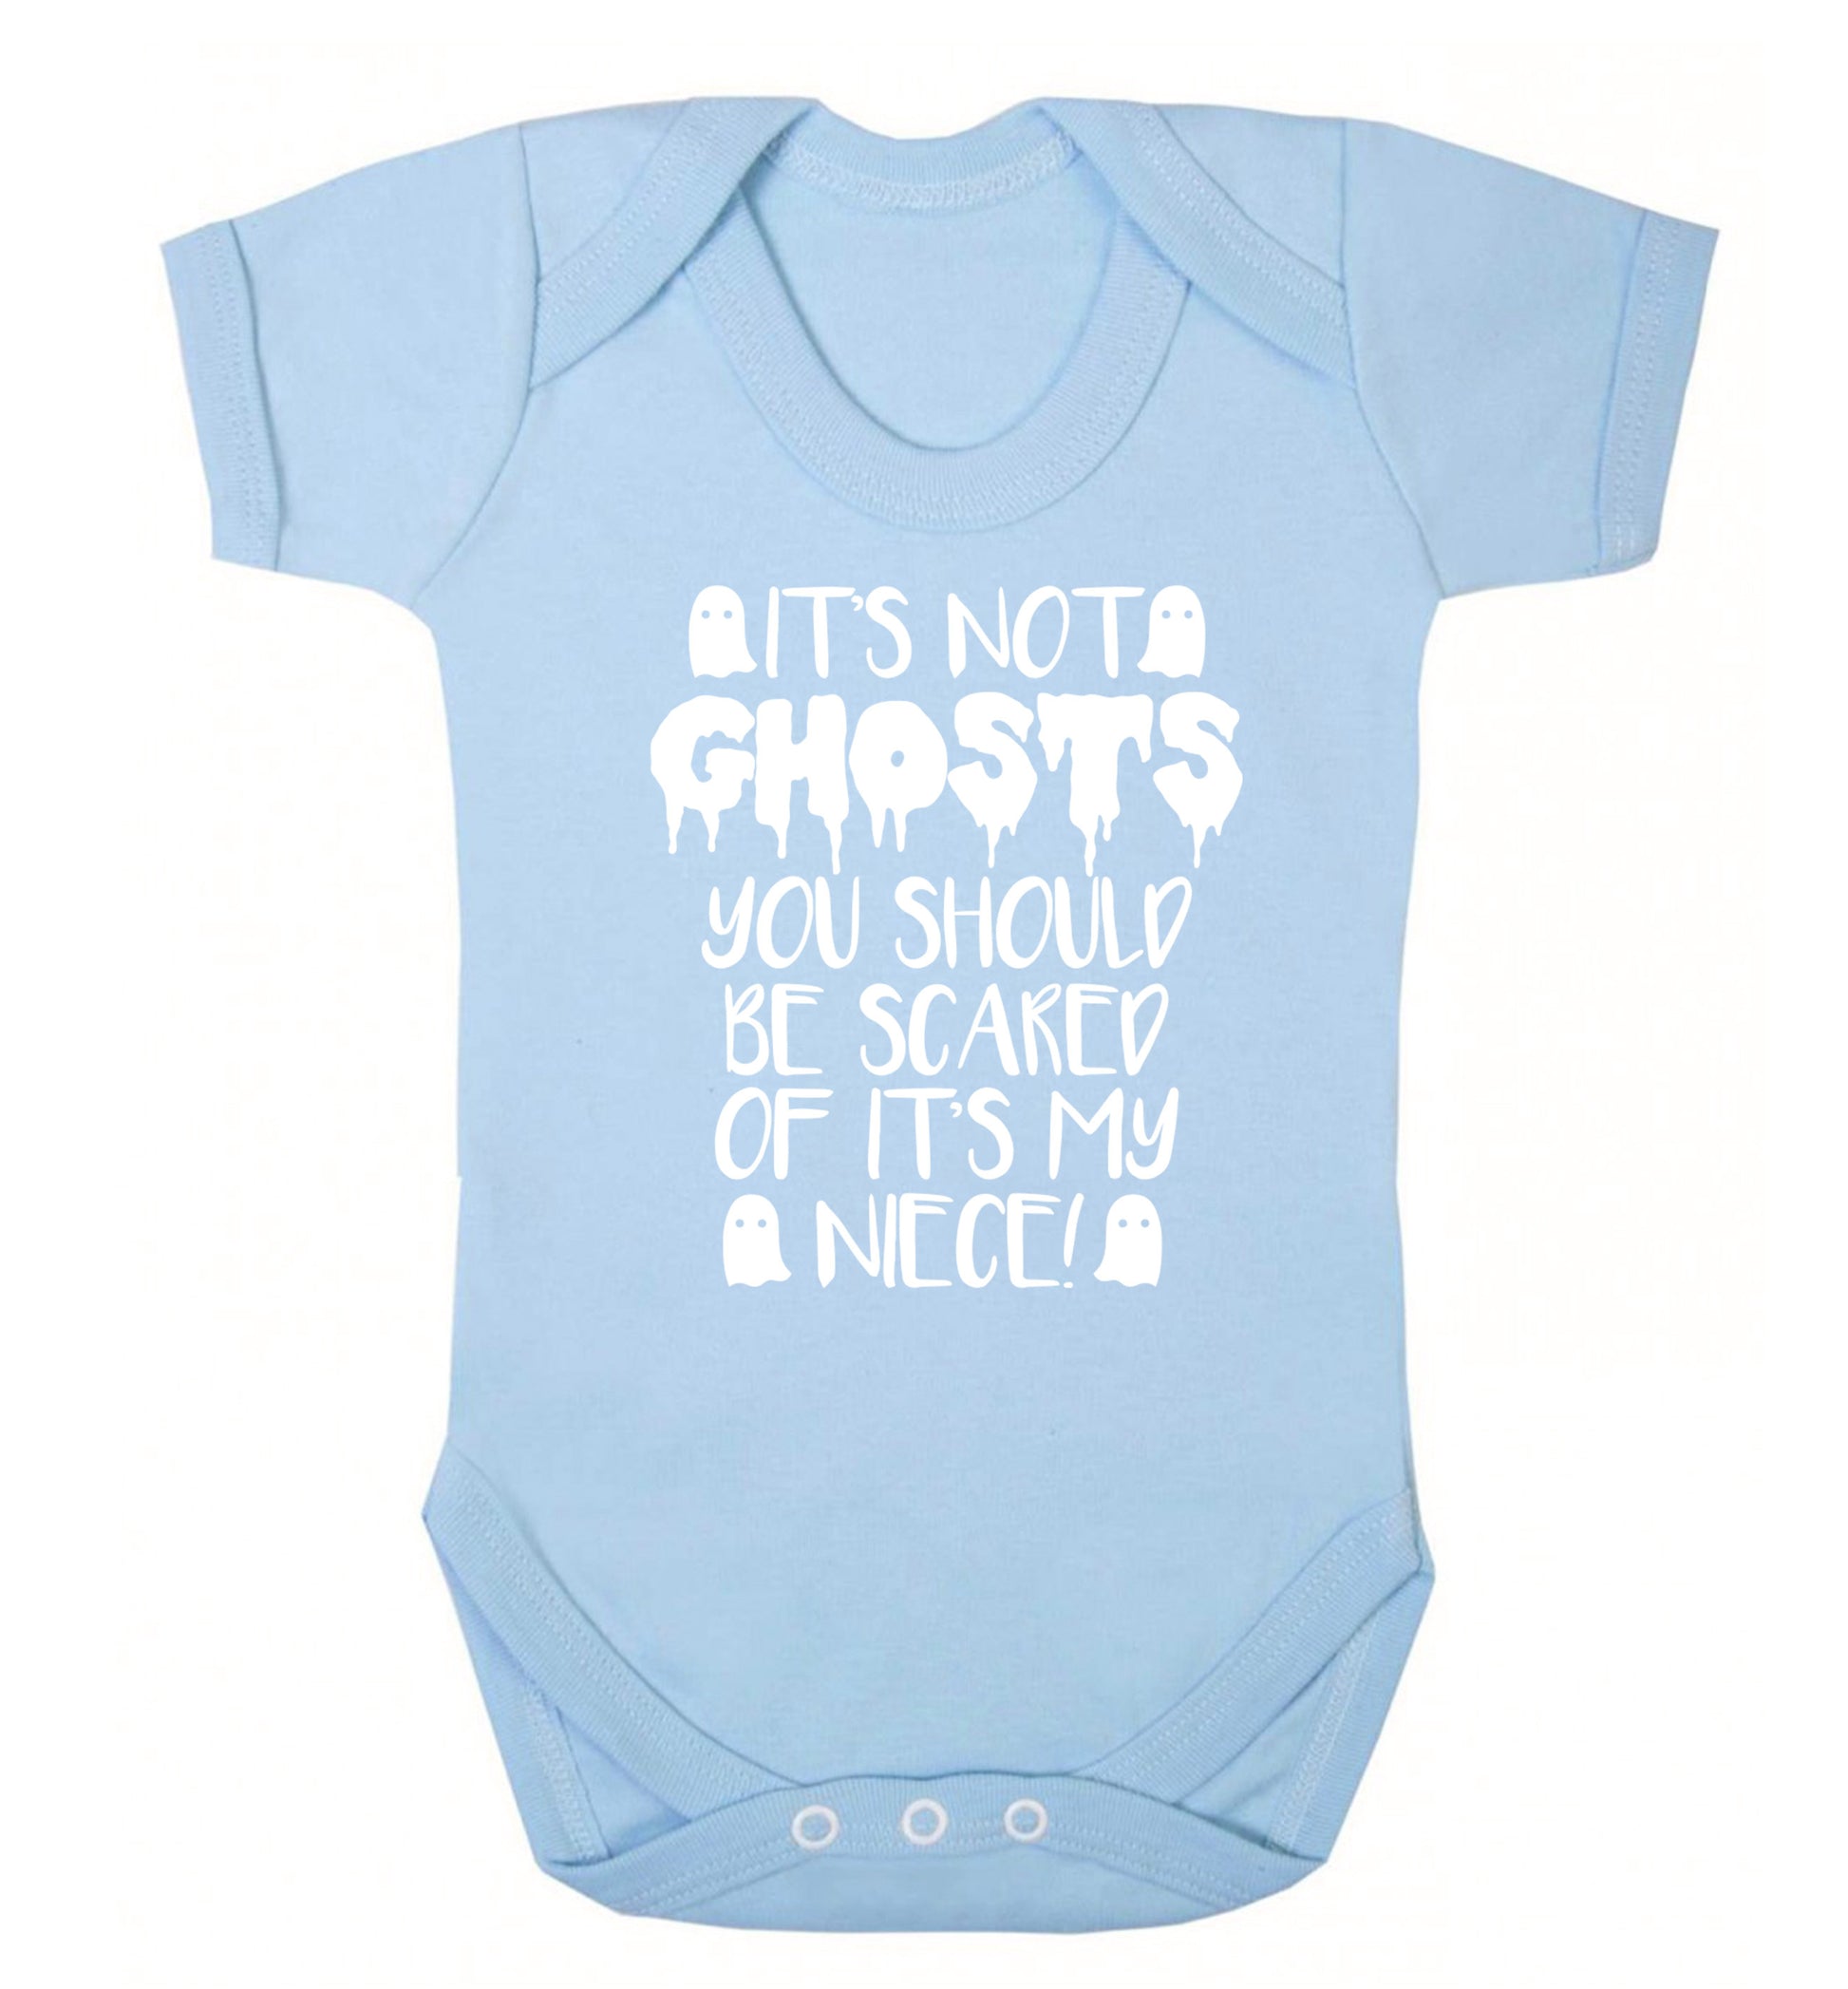 It's not ghosts you should be scared of it's my niece! Baby Vest pale blue 18-24 months